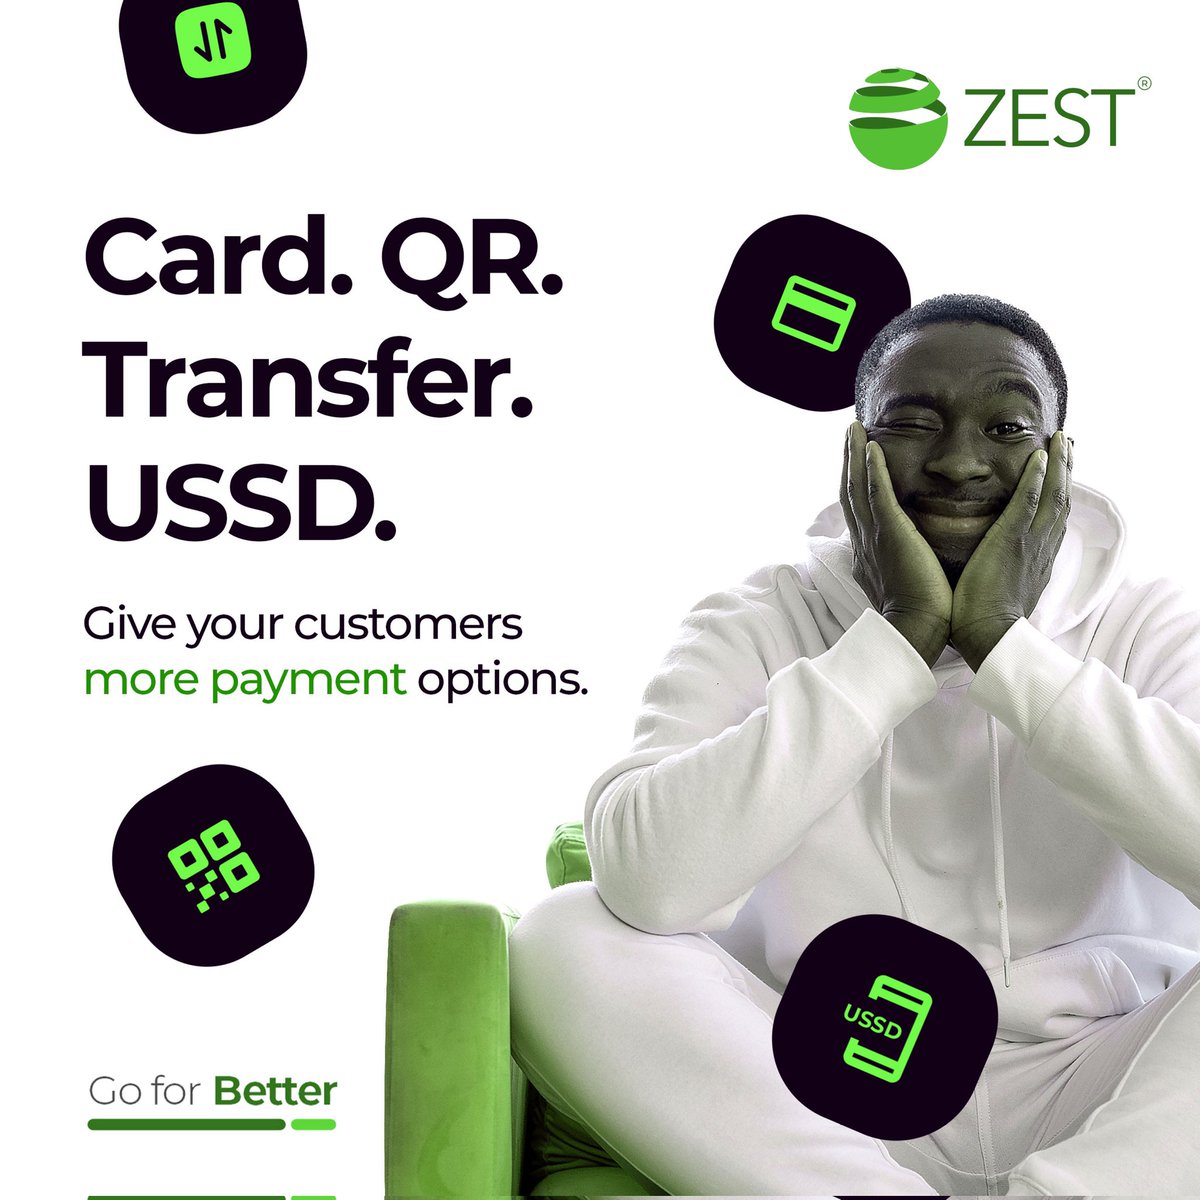 Don’t miss a sale this Valentine's season; give your customers multiple options to pay.

Get started on zestpayment.com today!

#GoForBetter #SeamlessPayments